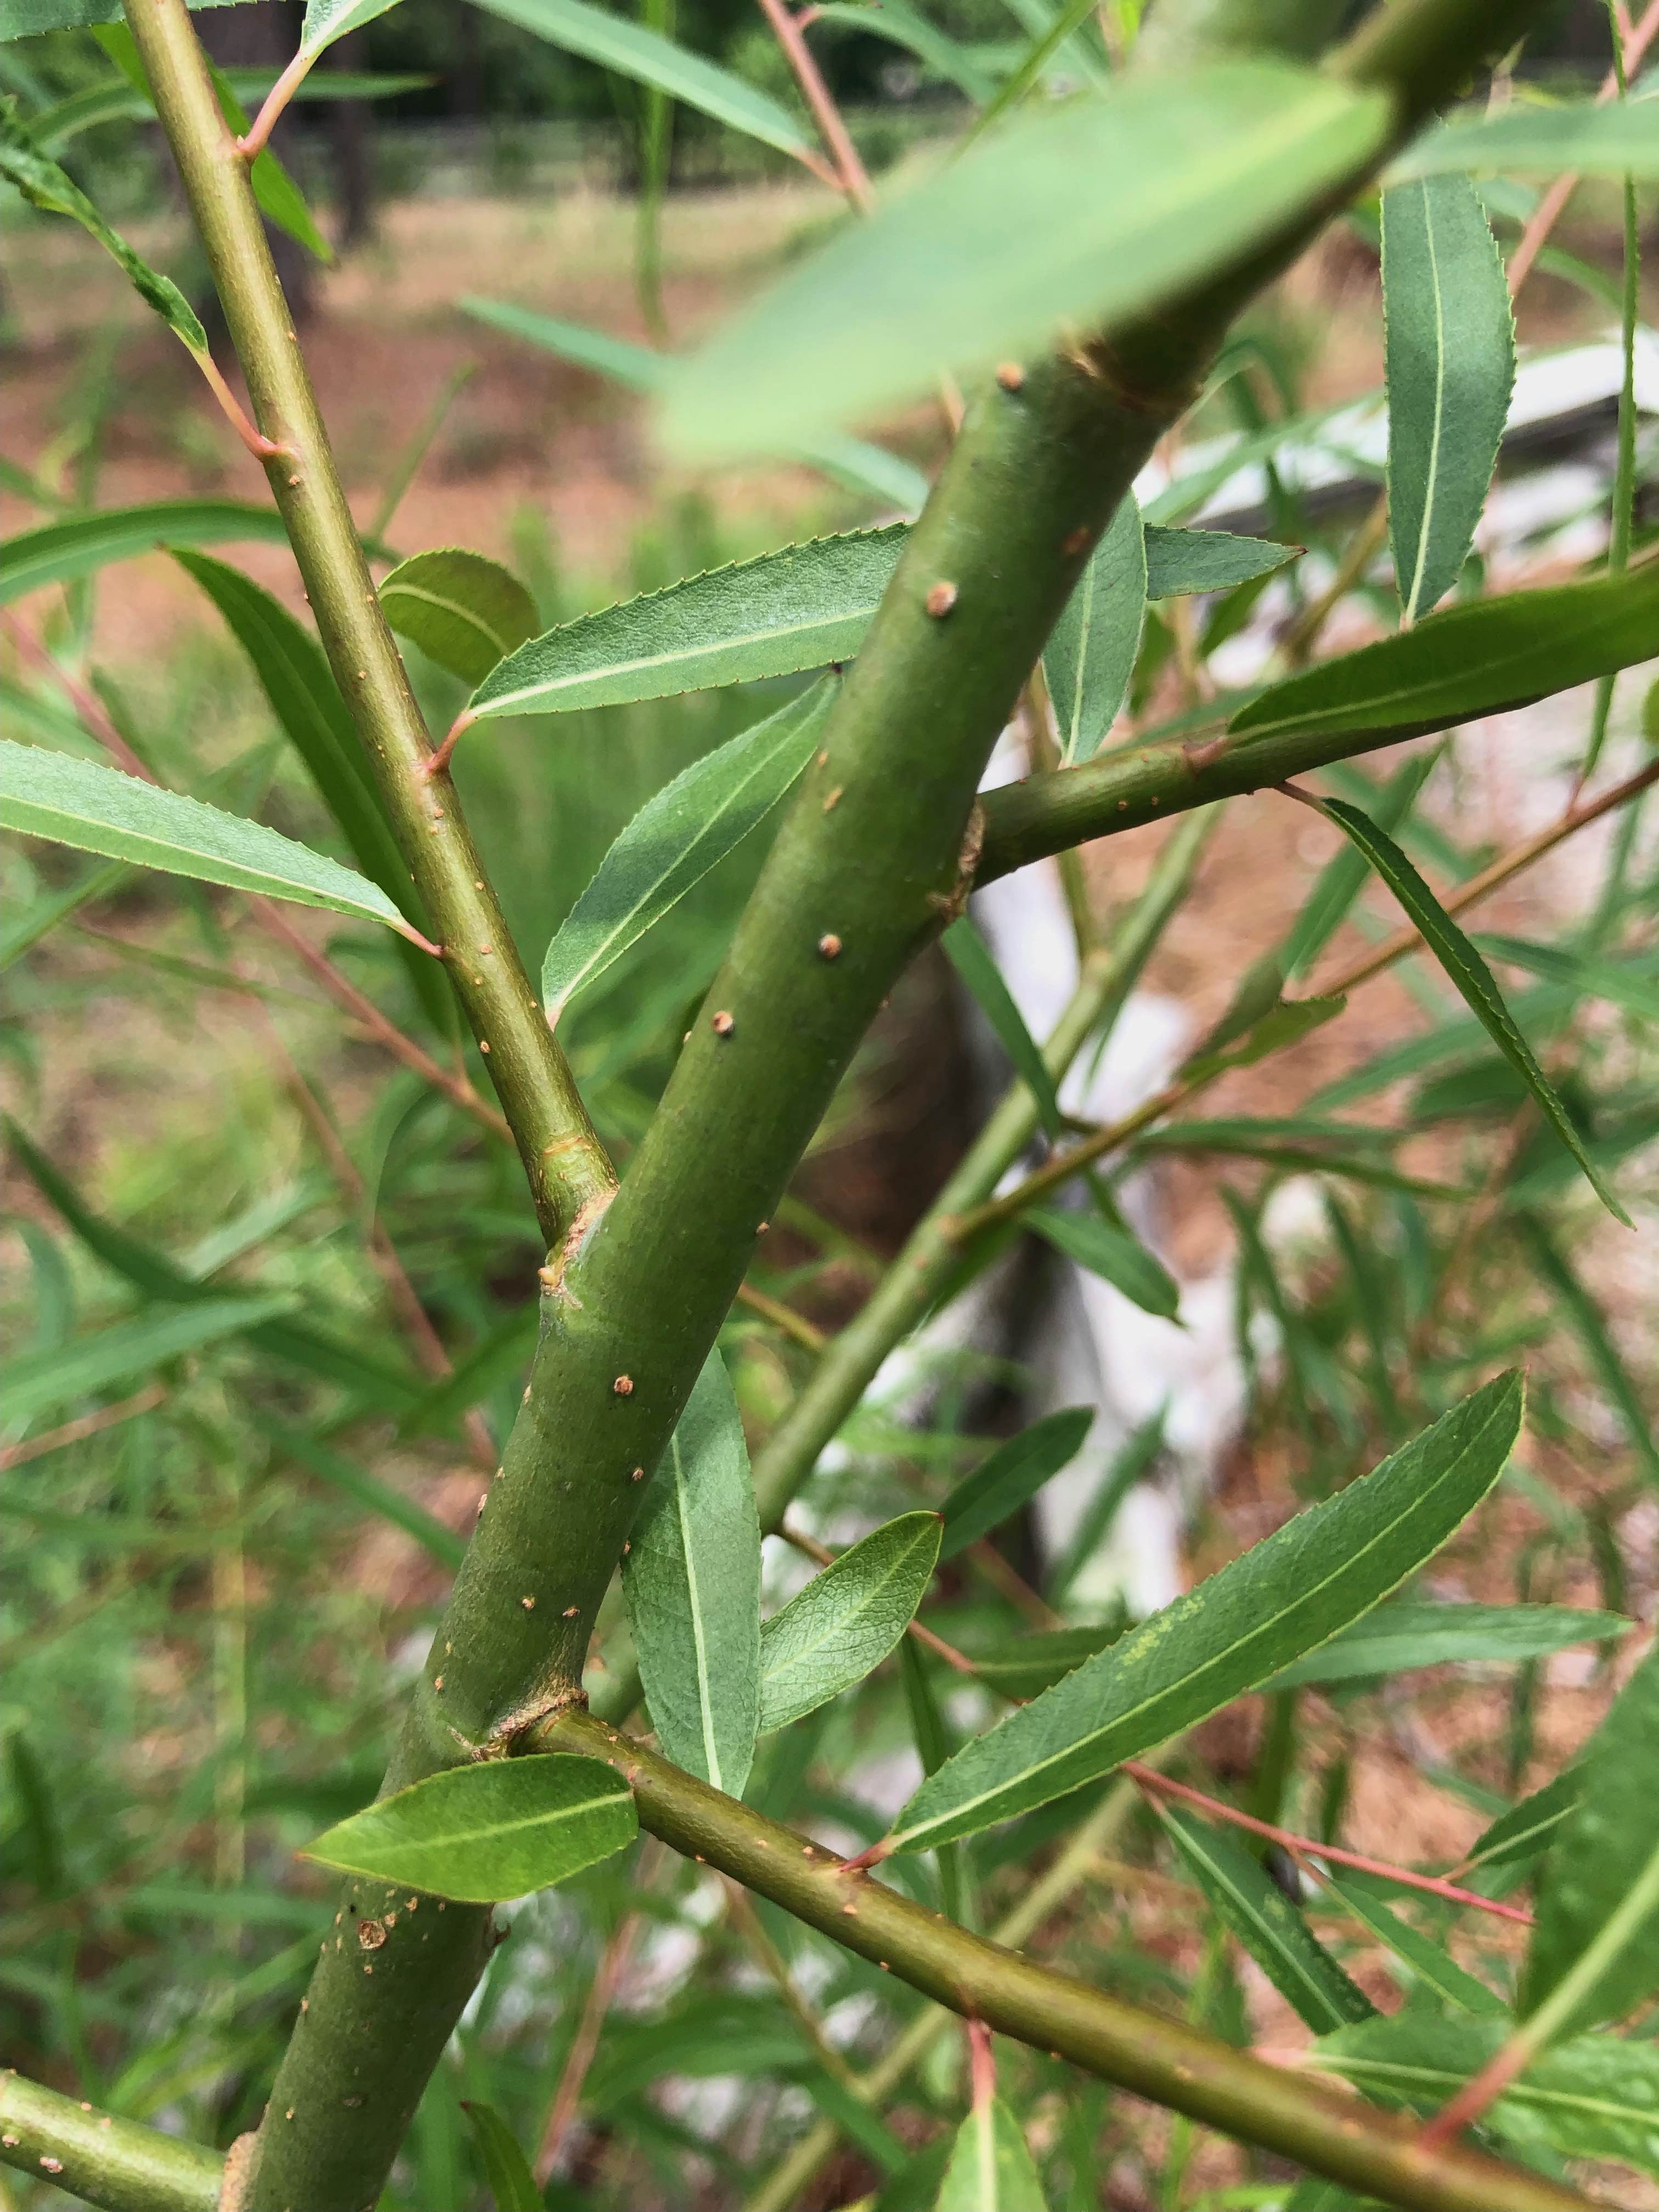 The Scientific Name is Salix nigra. You will likely hear them called Black Willow. This picture shows the Leaves alternate on the stem without persisting stipules. of Salix nigra